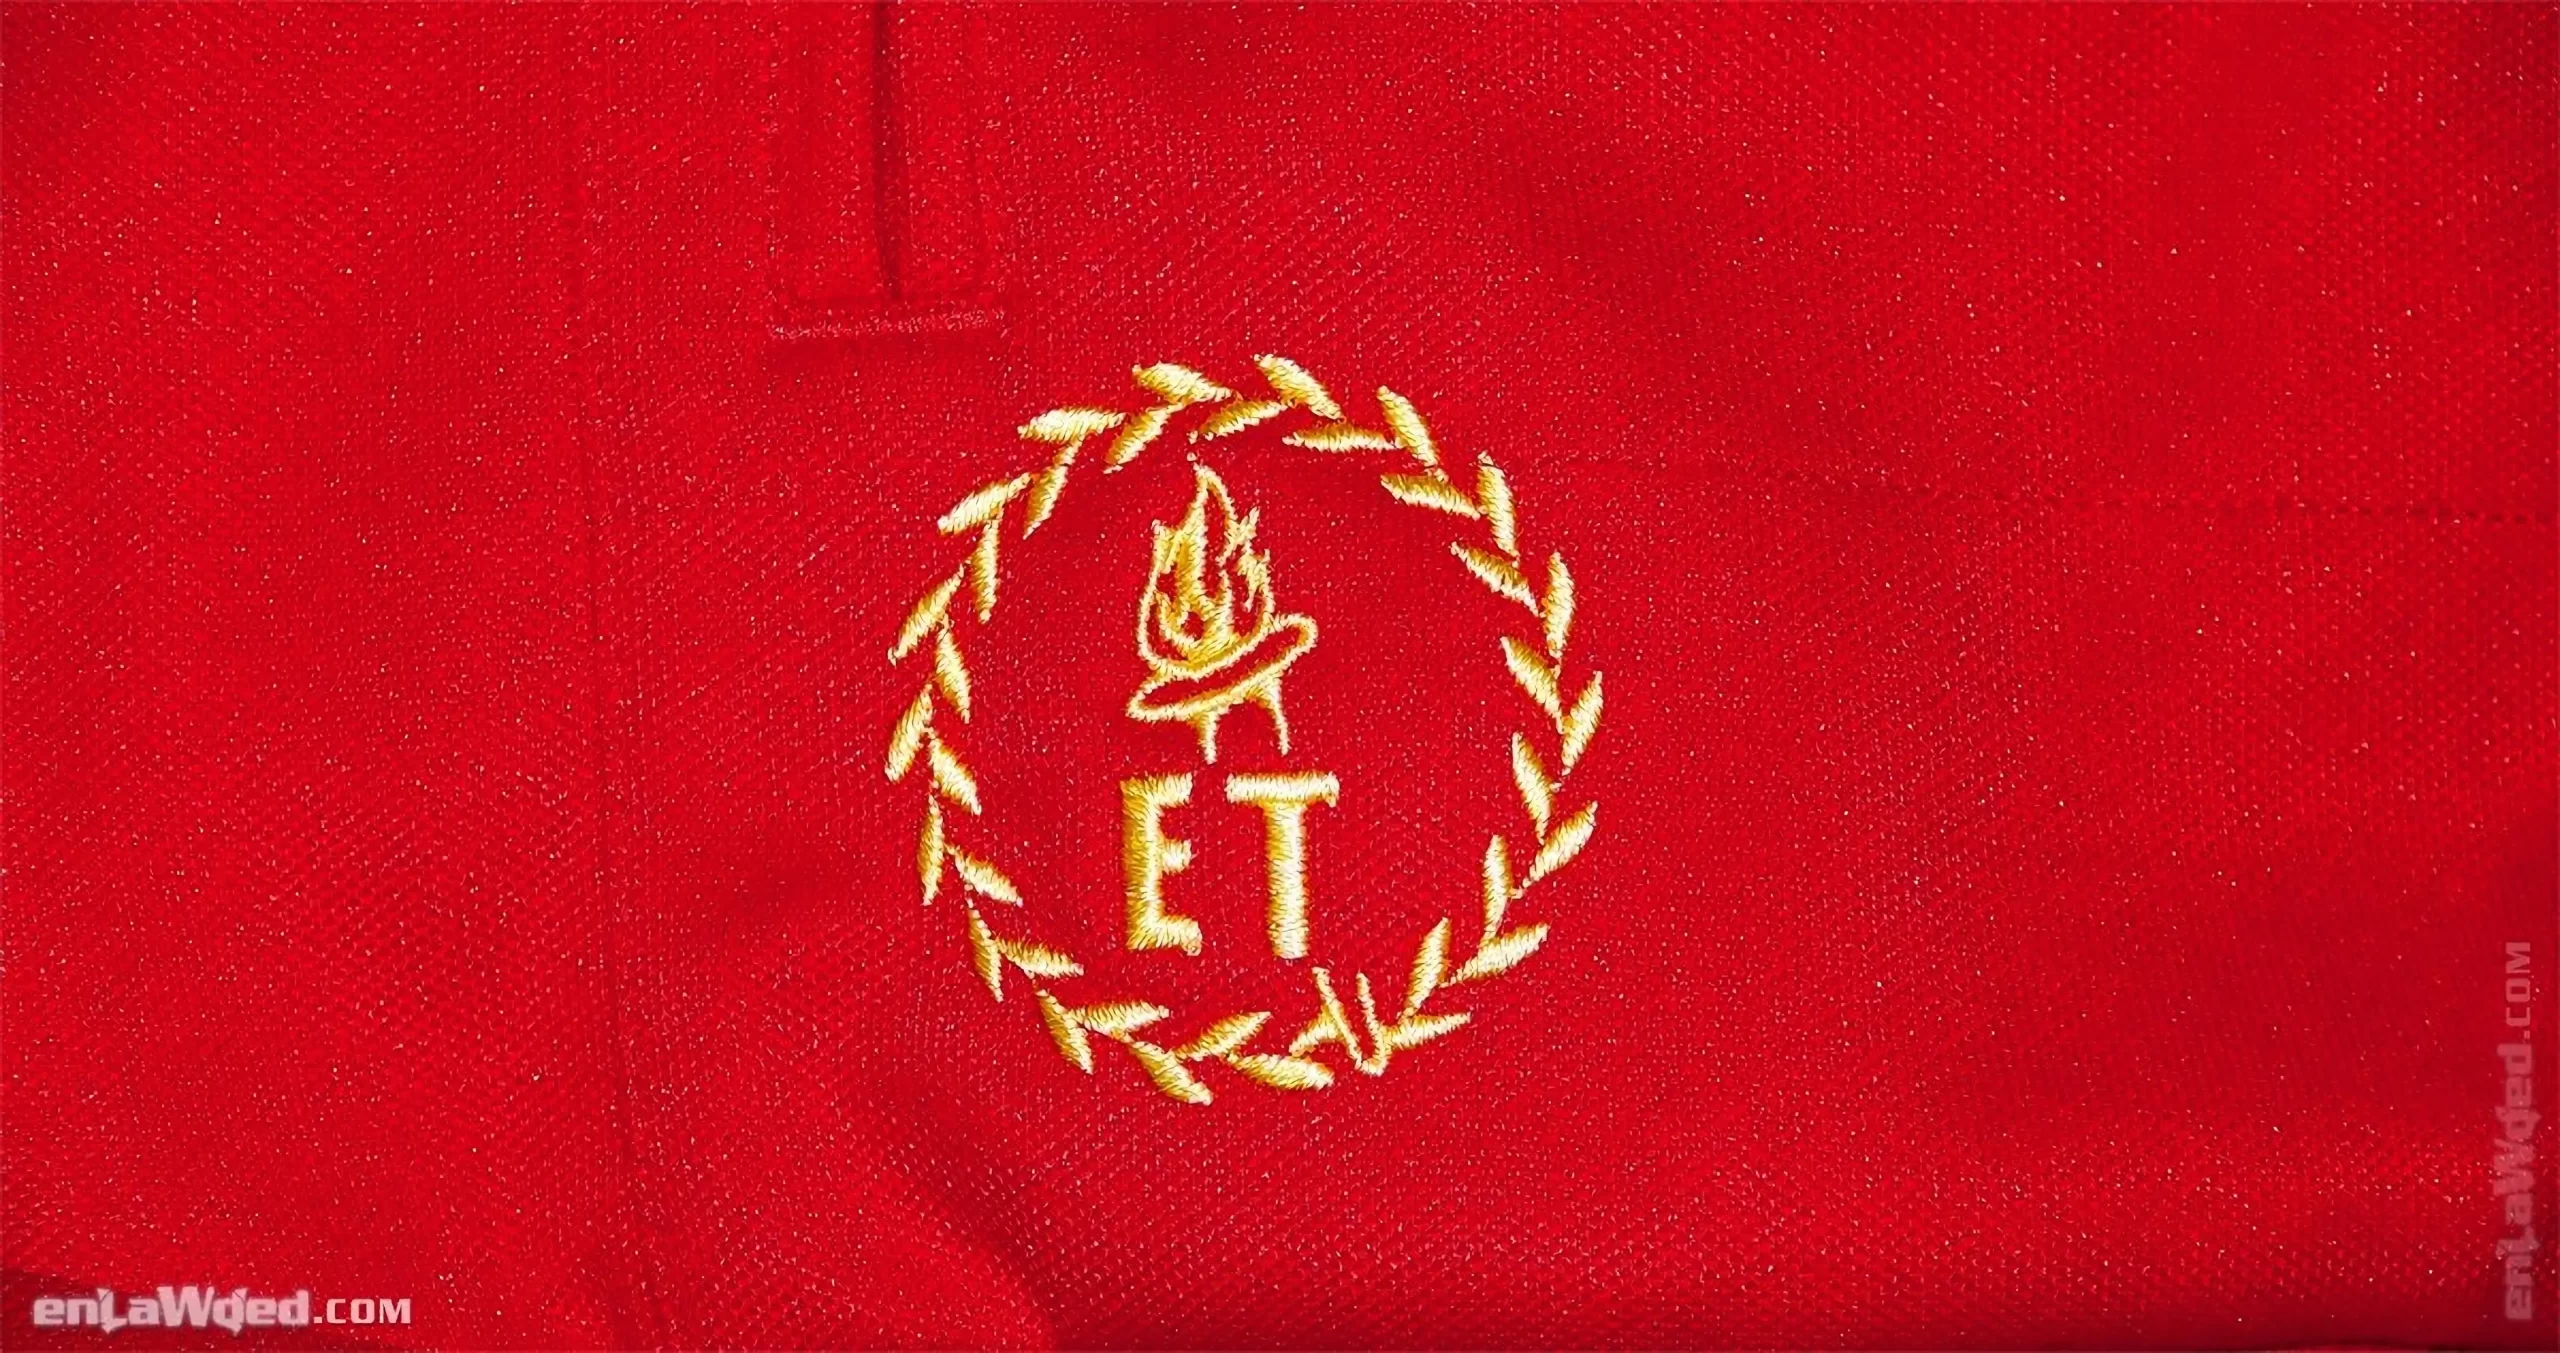 Torch flame icon in gold over red, with the two letters E and T for Ethiopia